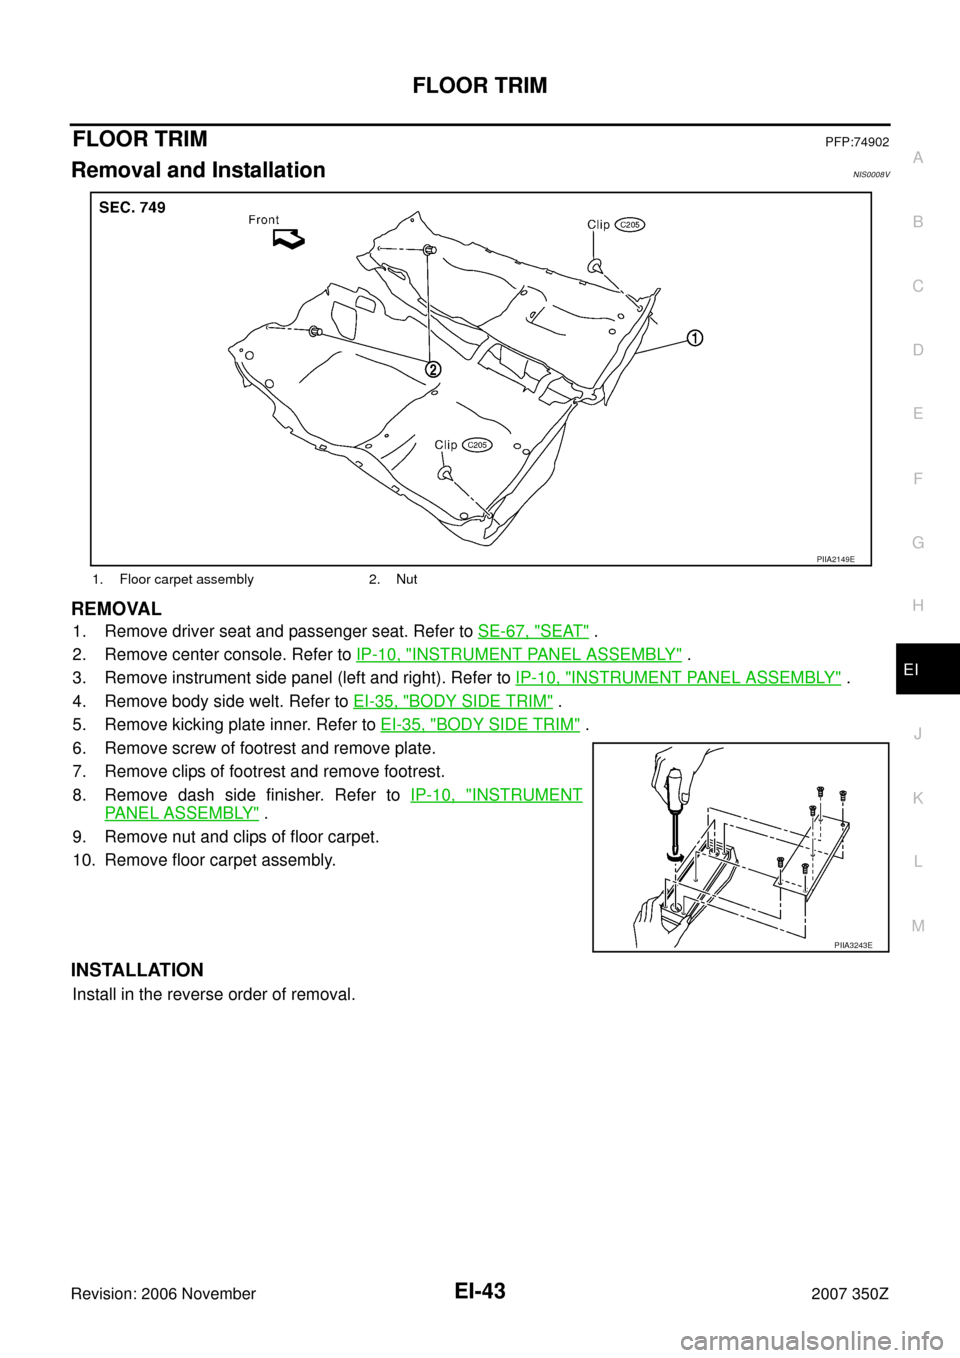 NISSAN 350Z 2007 Z33 Exterior And Interior Workshop Manual FLOOR TRIM
EI-43
C
D
E
F
G
H
J
K
L
MA
B
EI
Revision: 2006 November2007 350Z
FLOOR TRIMPFP:74902
Removal and InstallationNIS0008V
REMOVAL
1. Remove driver seat and passenger seat. Refer to SE-67, "SEAT